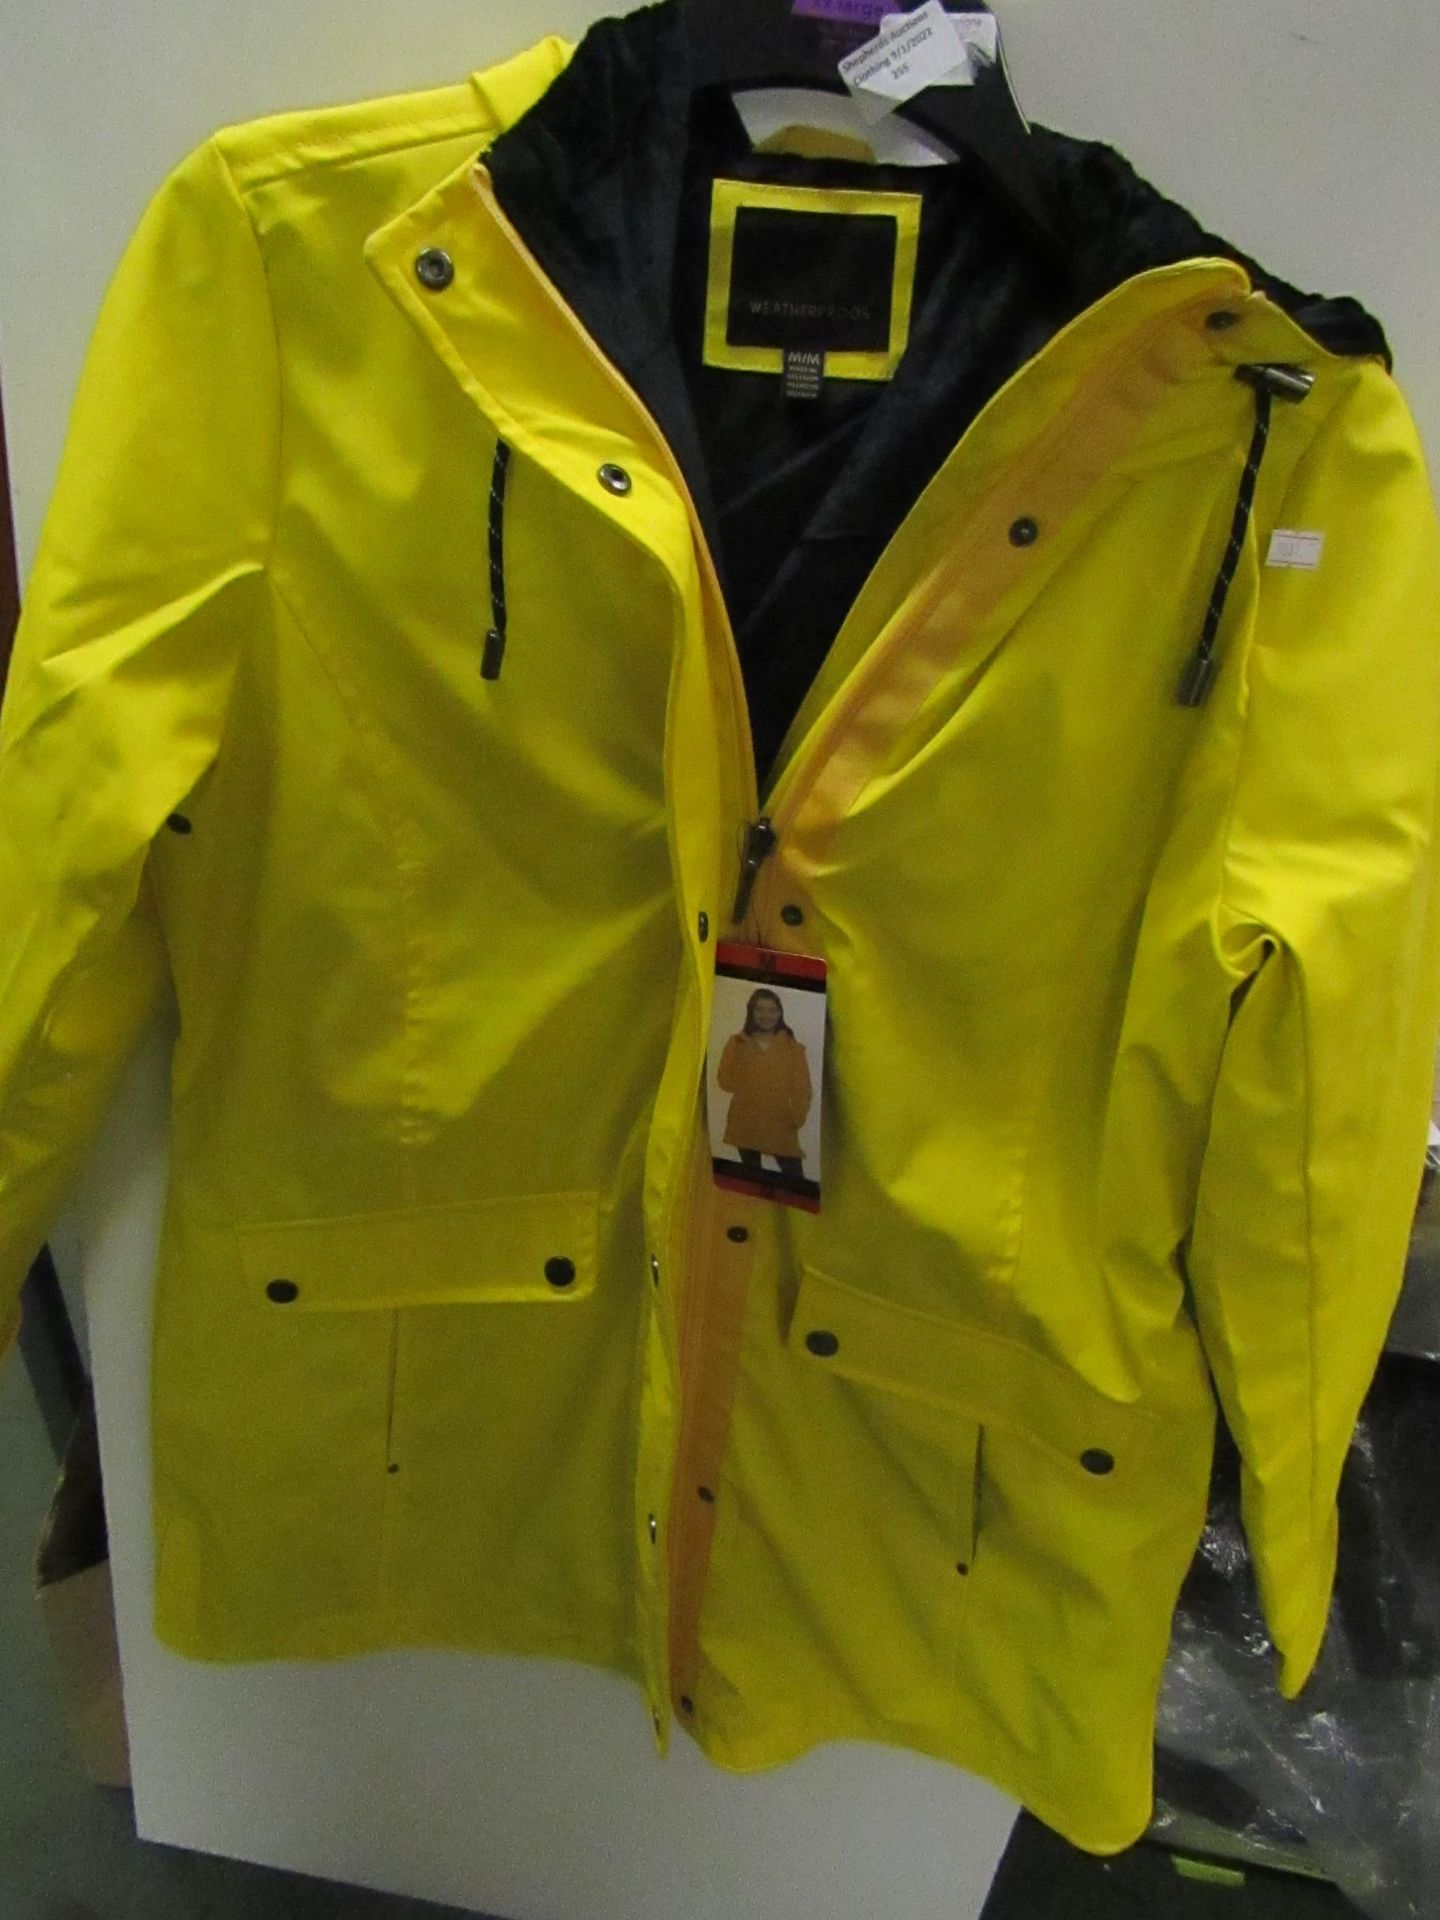 Water Resistant Jacket Modern Fit Light Padding For Warmth Yellow Size M new With Tags